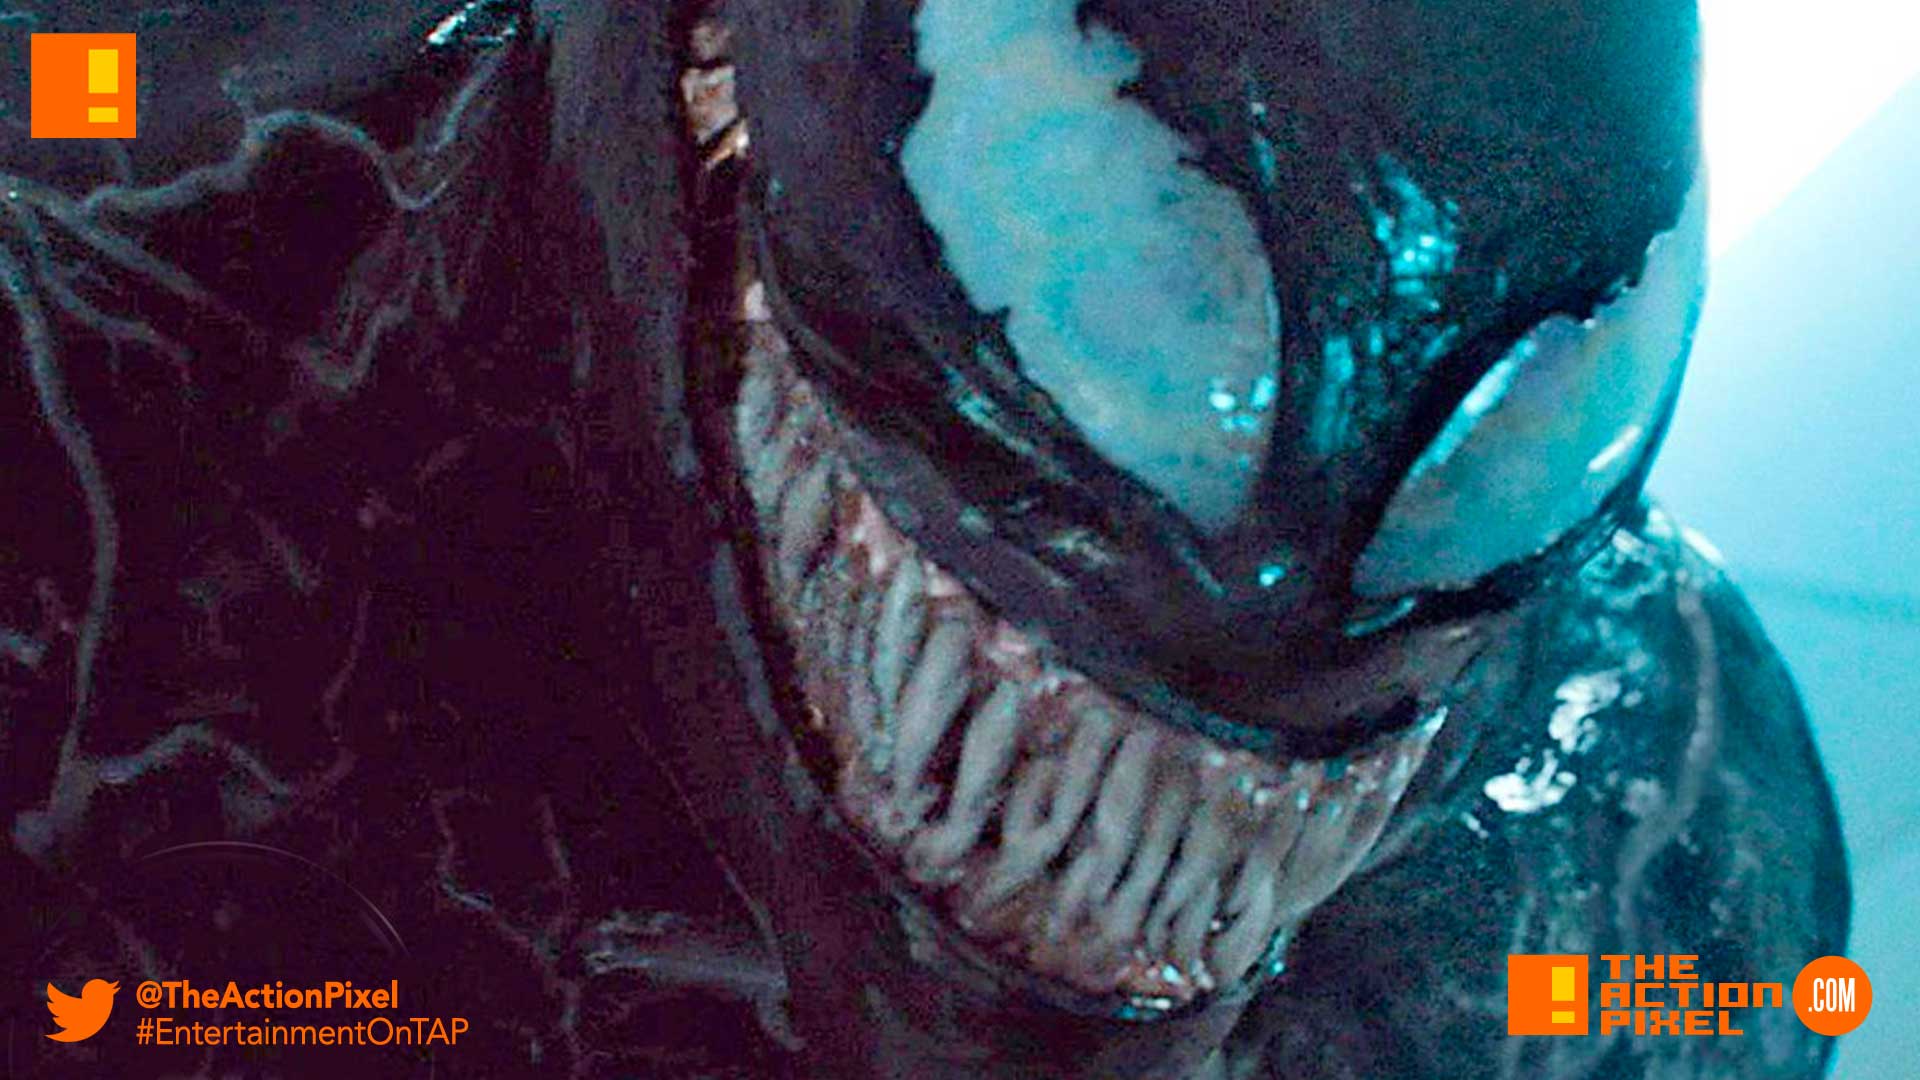 poster, trailer, tom hardy, venom, spider-man, spin-off, the action pixel, entertainment on tap,sony pictures,official trailer, entertainment weekly